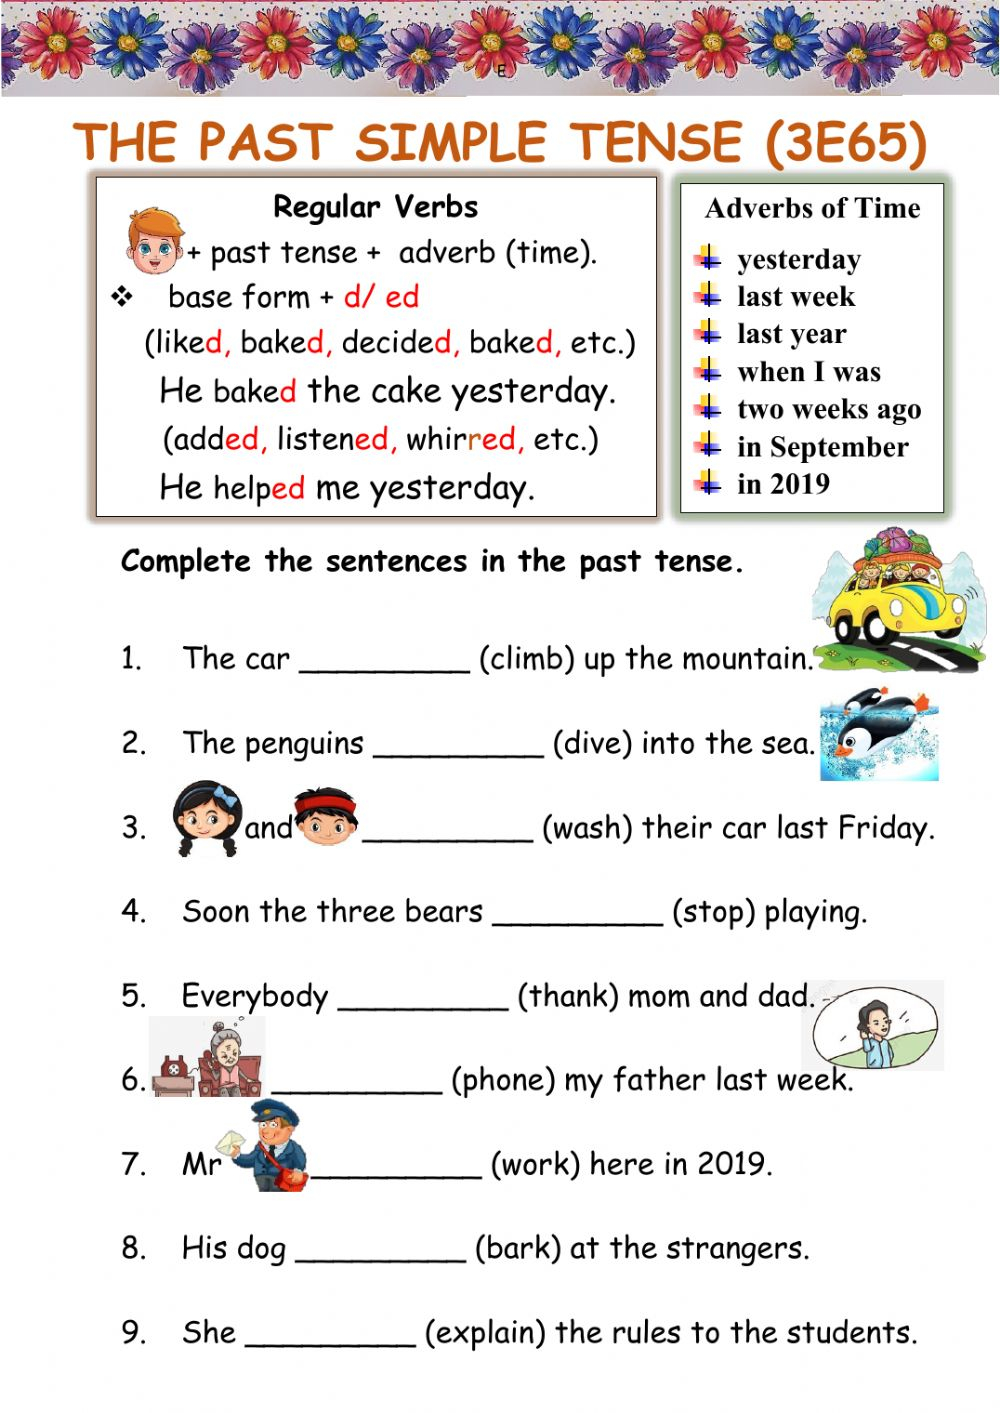 The Past Simple Tense Interactive Worksheet